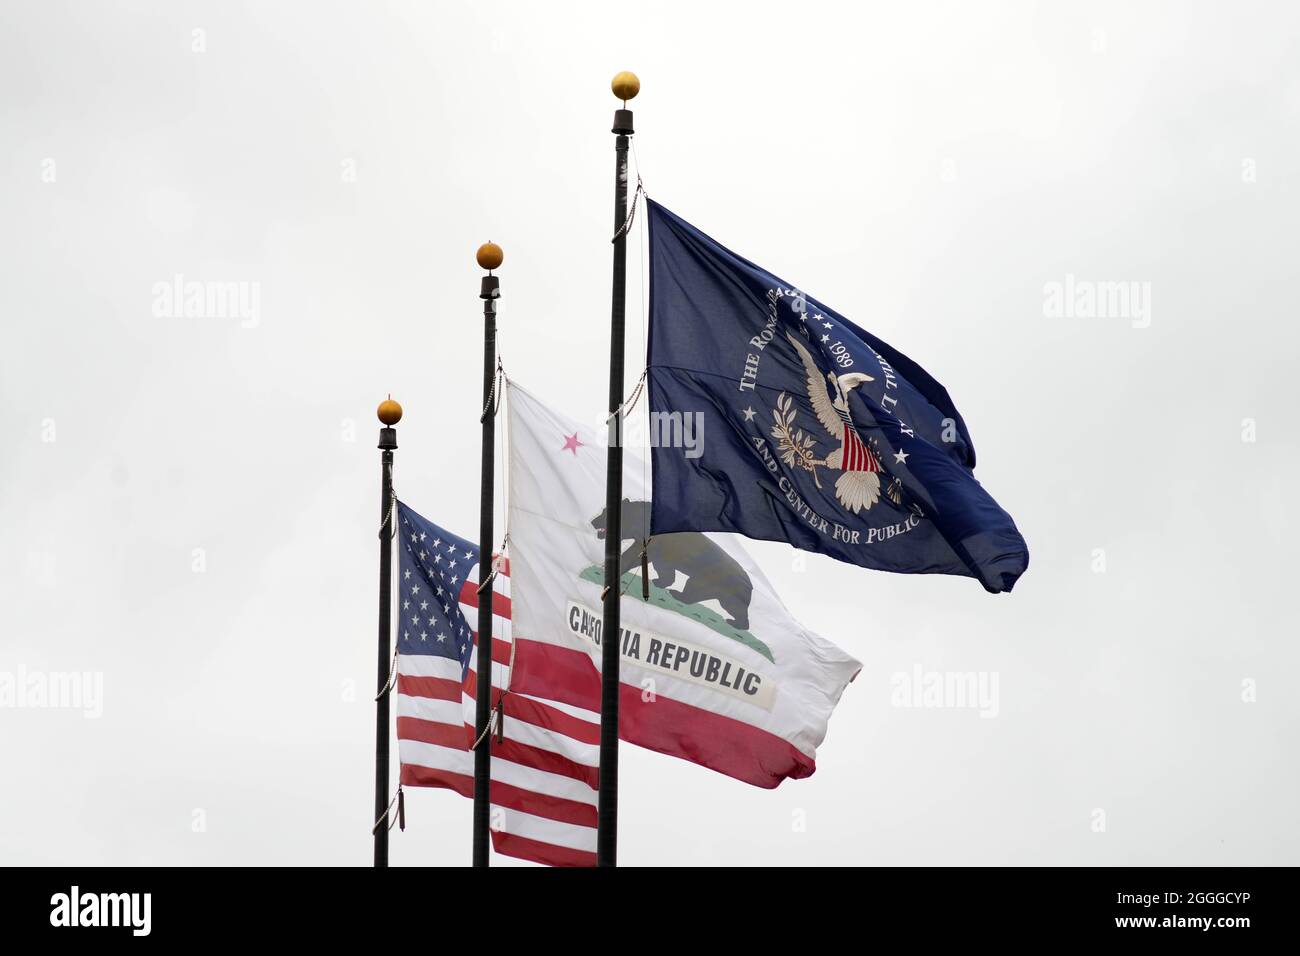 Flags at the Ronald Reagan Presidential Library, Wednesday, Aug. 18, 2021, in Simi Valley, Caif. Stock Photo